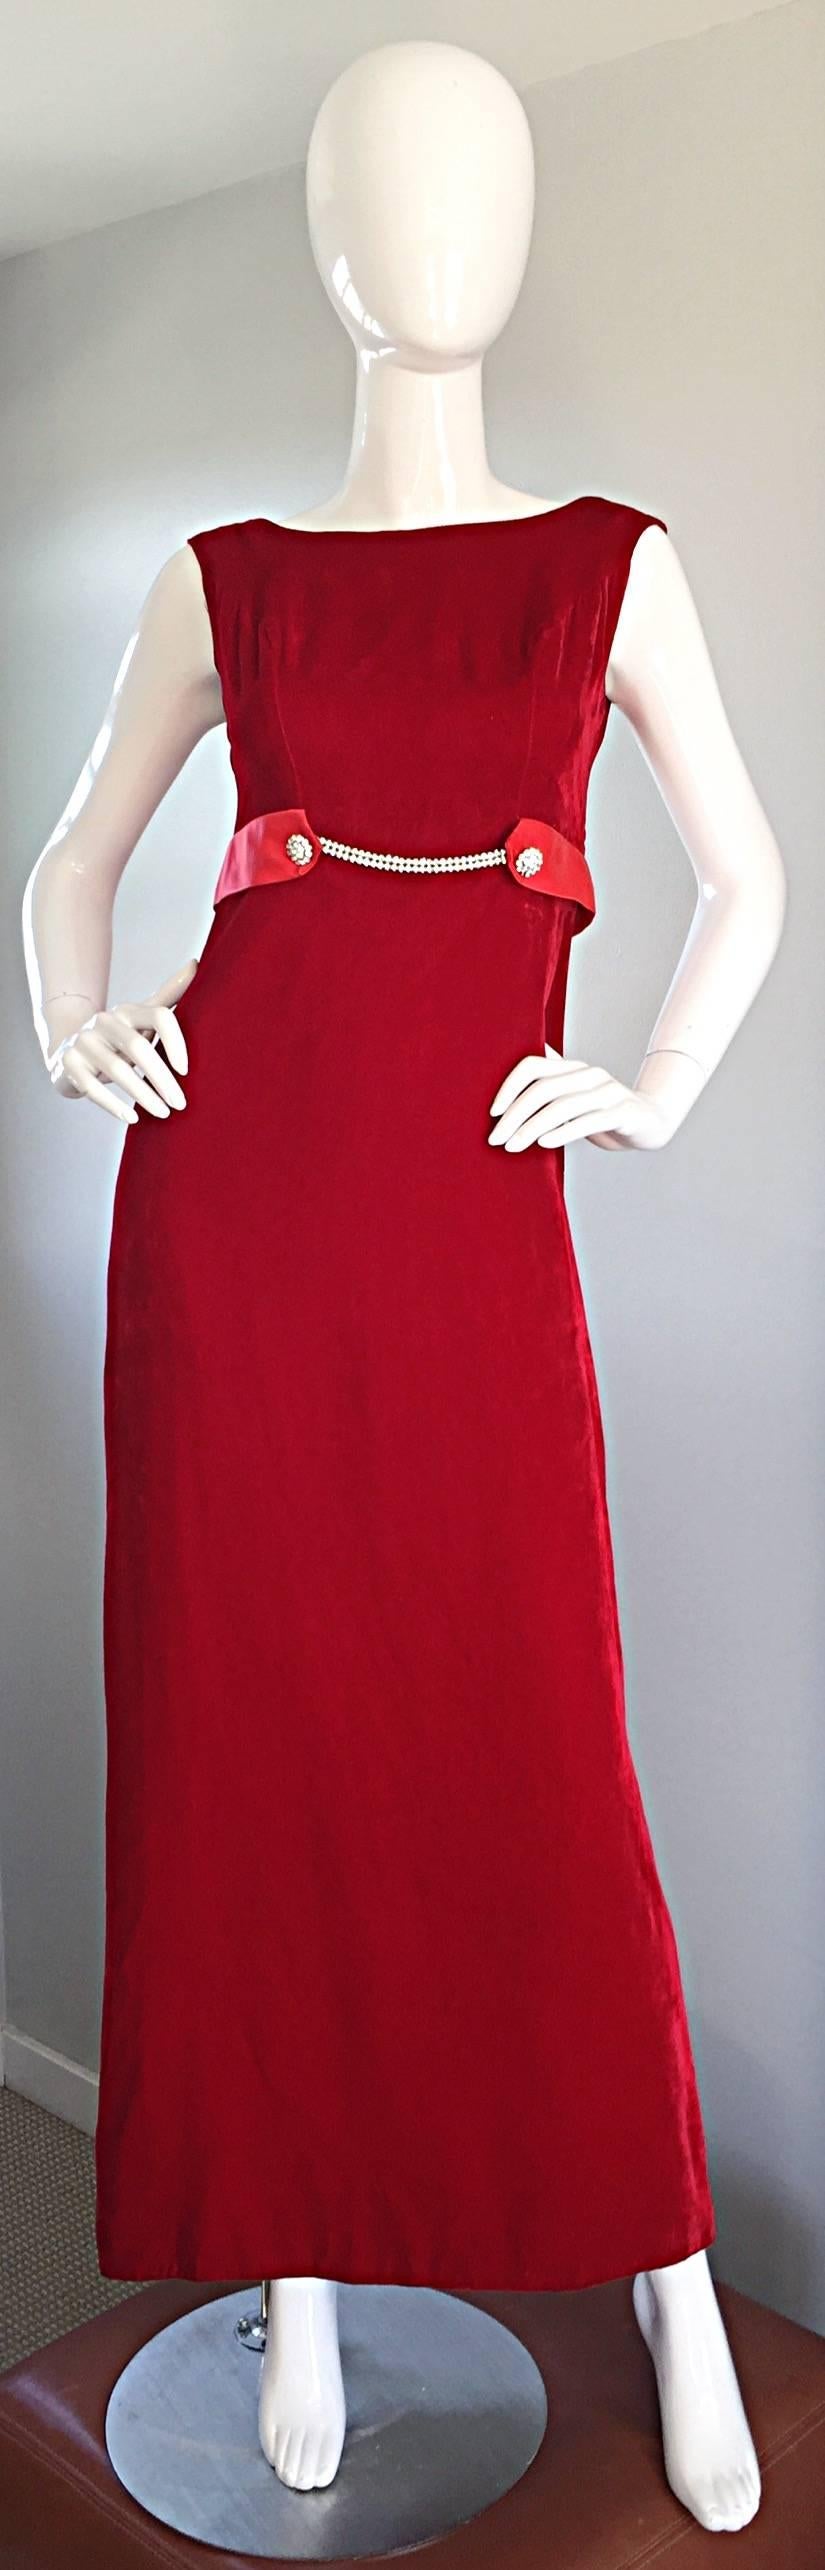 Beautiful 1960s red velvet dress! Wonderful flattering fit, with a timeless style. Two mock rhinestones at either side of the waist, connected to a rhinestone chain in center. Soft, luxurious velvet. Chic bow attached at the back. A true head